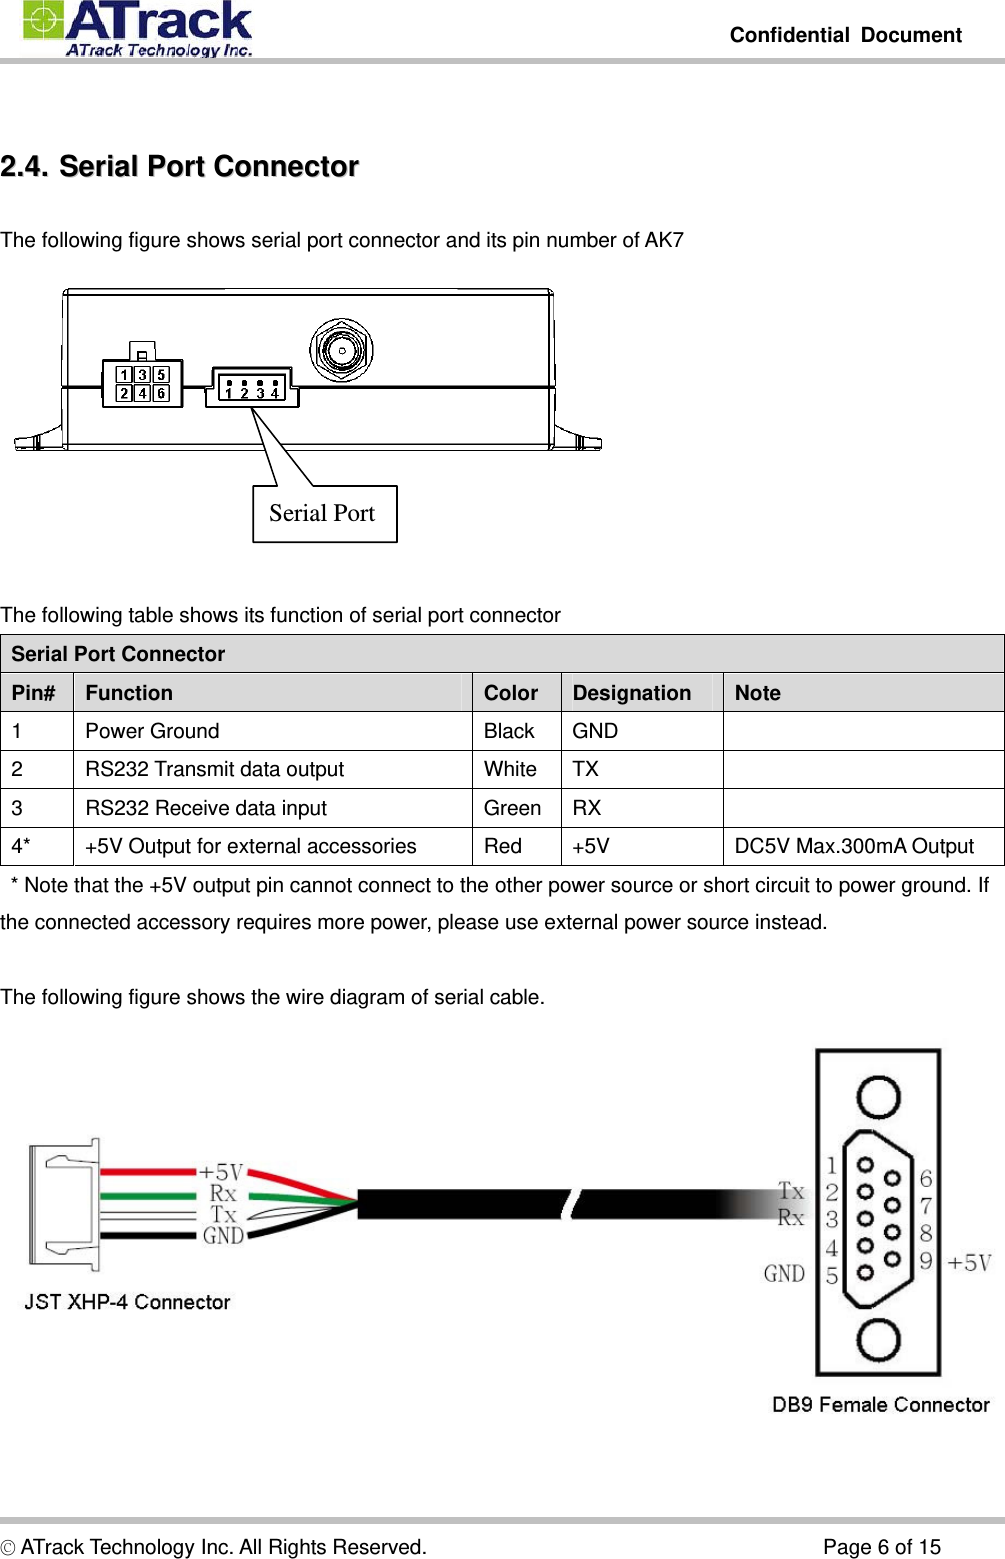         Confidential Document  © ATrack Technology Inc. All Rights Reserved.                                      Page 6 of 15  22..44..  SSeerriiaall  PPoorrtt  CCoonnnneeccttoorr  The following figure shows serial port connector and its pin number of AK7     The following table shows its function of serial port connector Serial Port Connector Pin#  Function  Color  Designation  Note 1 Power Ground  Black GND   2  RS232 Transmit data output  White  TX   3  RS232 Receive data input  Green  RX   4*  +5V Output for external accessories  Red  +5V  DC5V Max.300mA Output   * Note that the +5V output pin cannot connect to the other power source or short circuit to power ground. If the connected accessory requires more power, please use external power source instead.  The following figure shows the wire diagram of serial cable.  Serial Port 